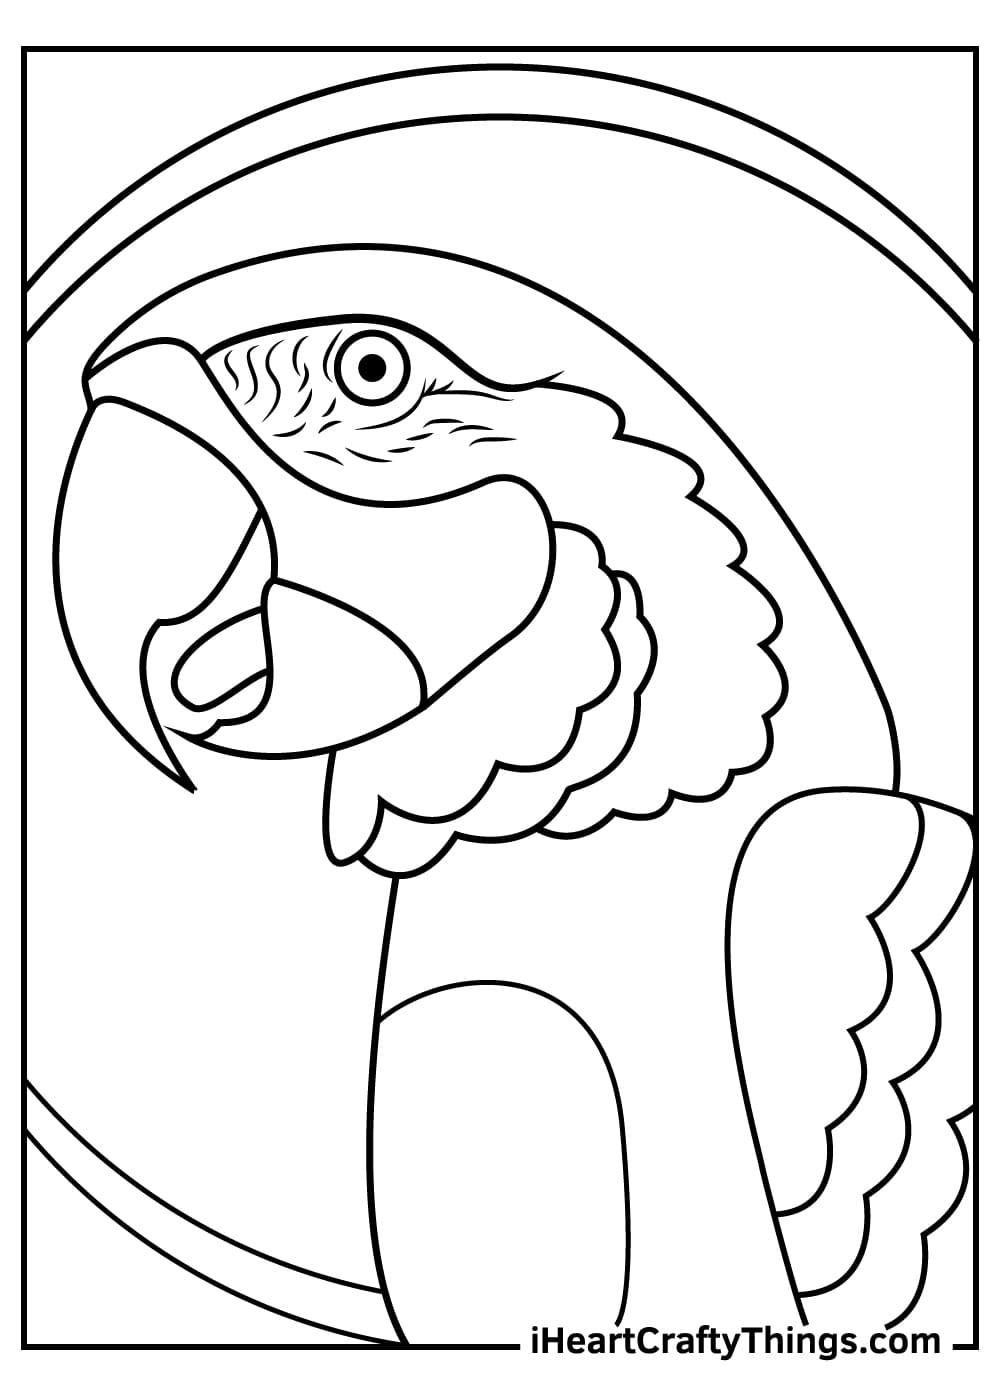 Free Printable Parrot Coloring Page